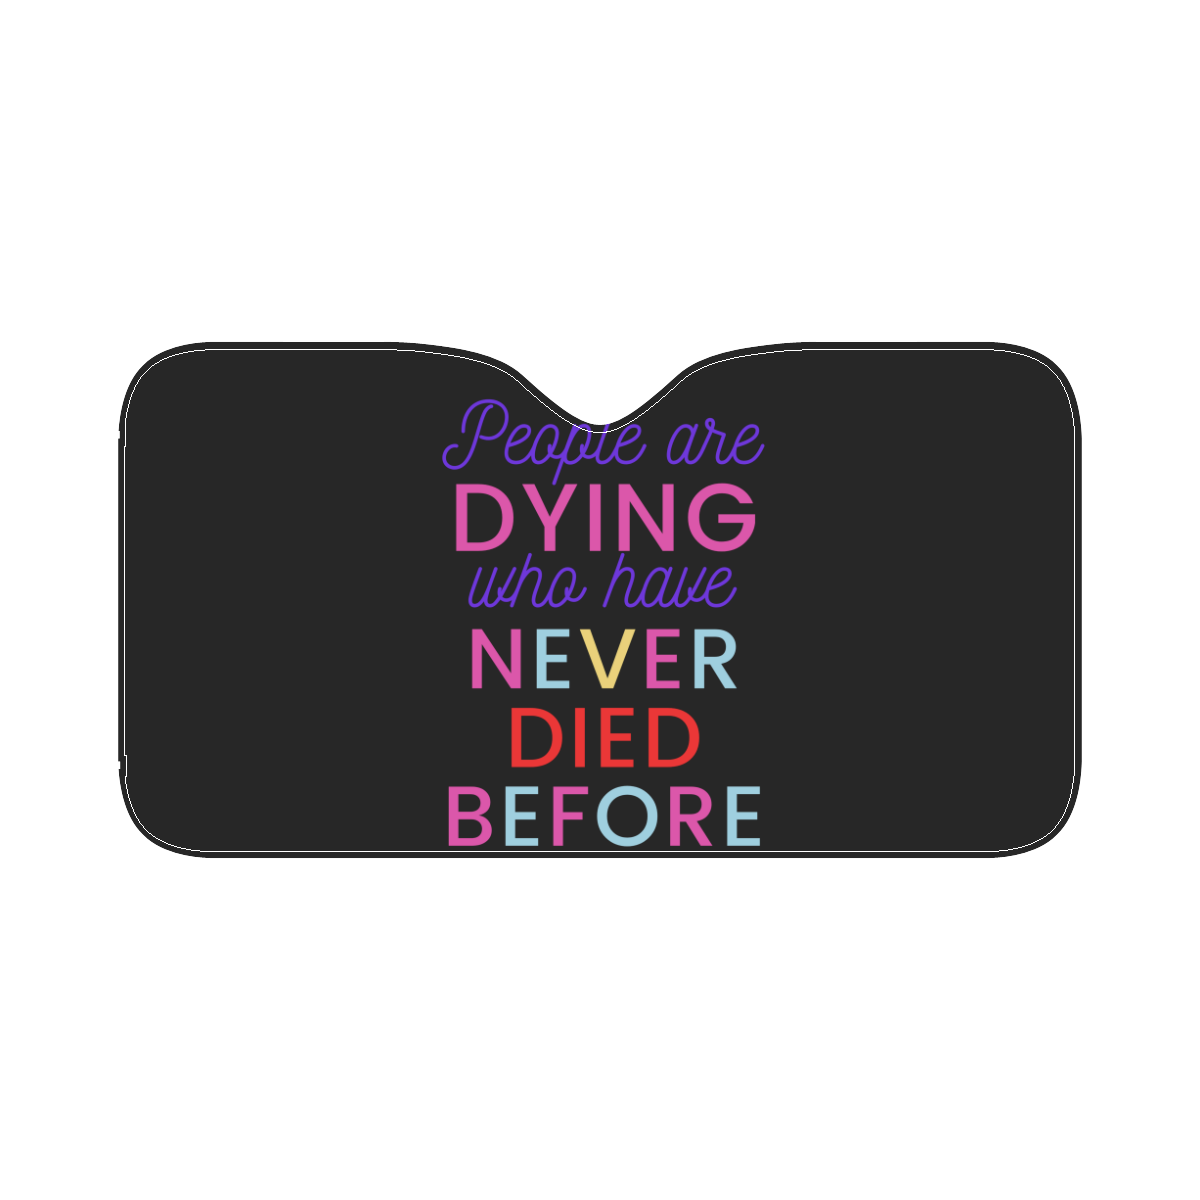 Trump PEOPLE ARE DYING WHO HAVE NEVER DIED BEFORE Car Sun Shade 55"x30"